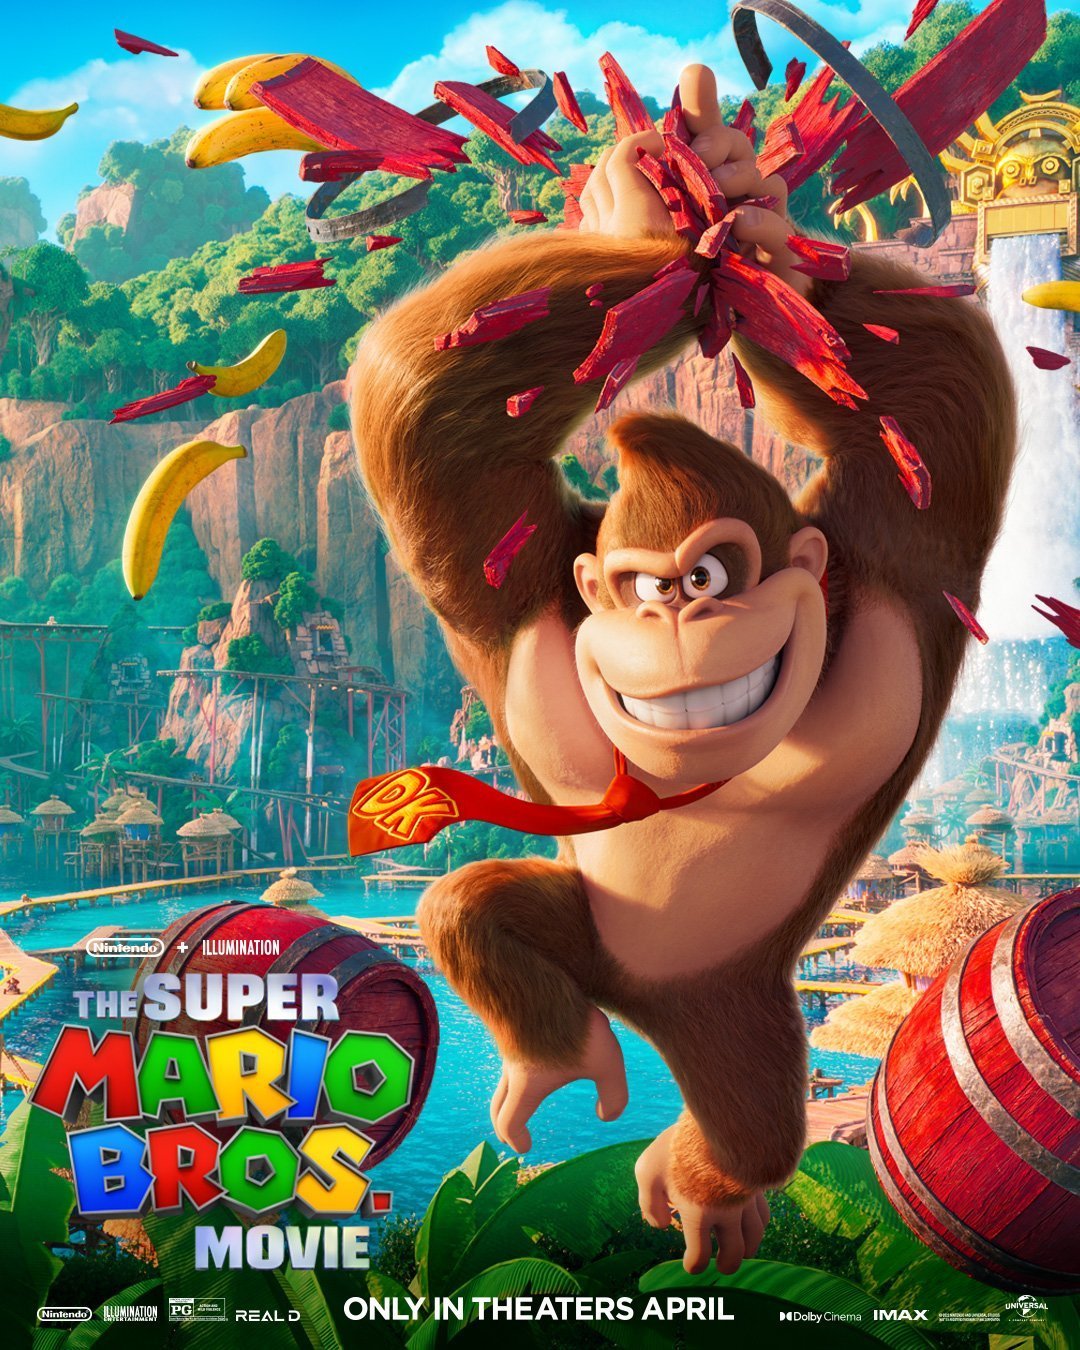 Super Mario Bros. Movie Shares New Posters Of DK & Bowser, Here's A Look